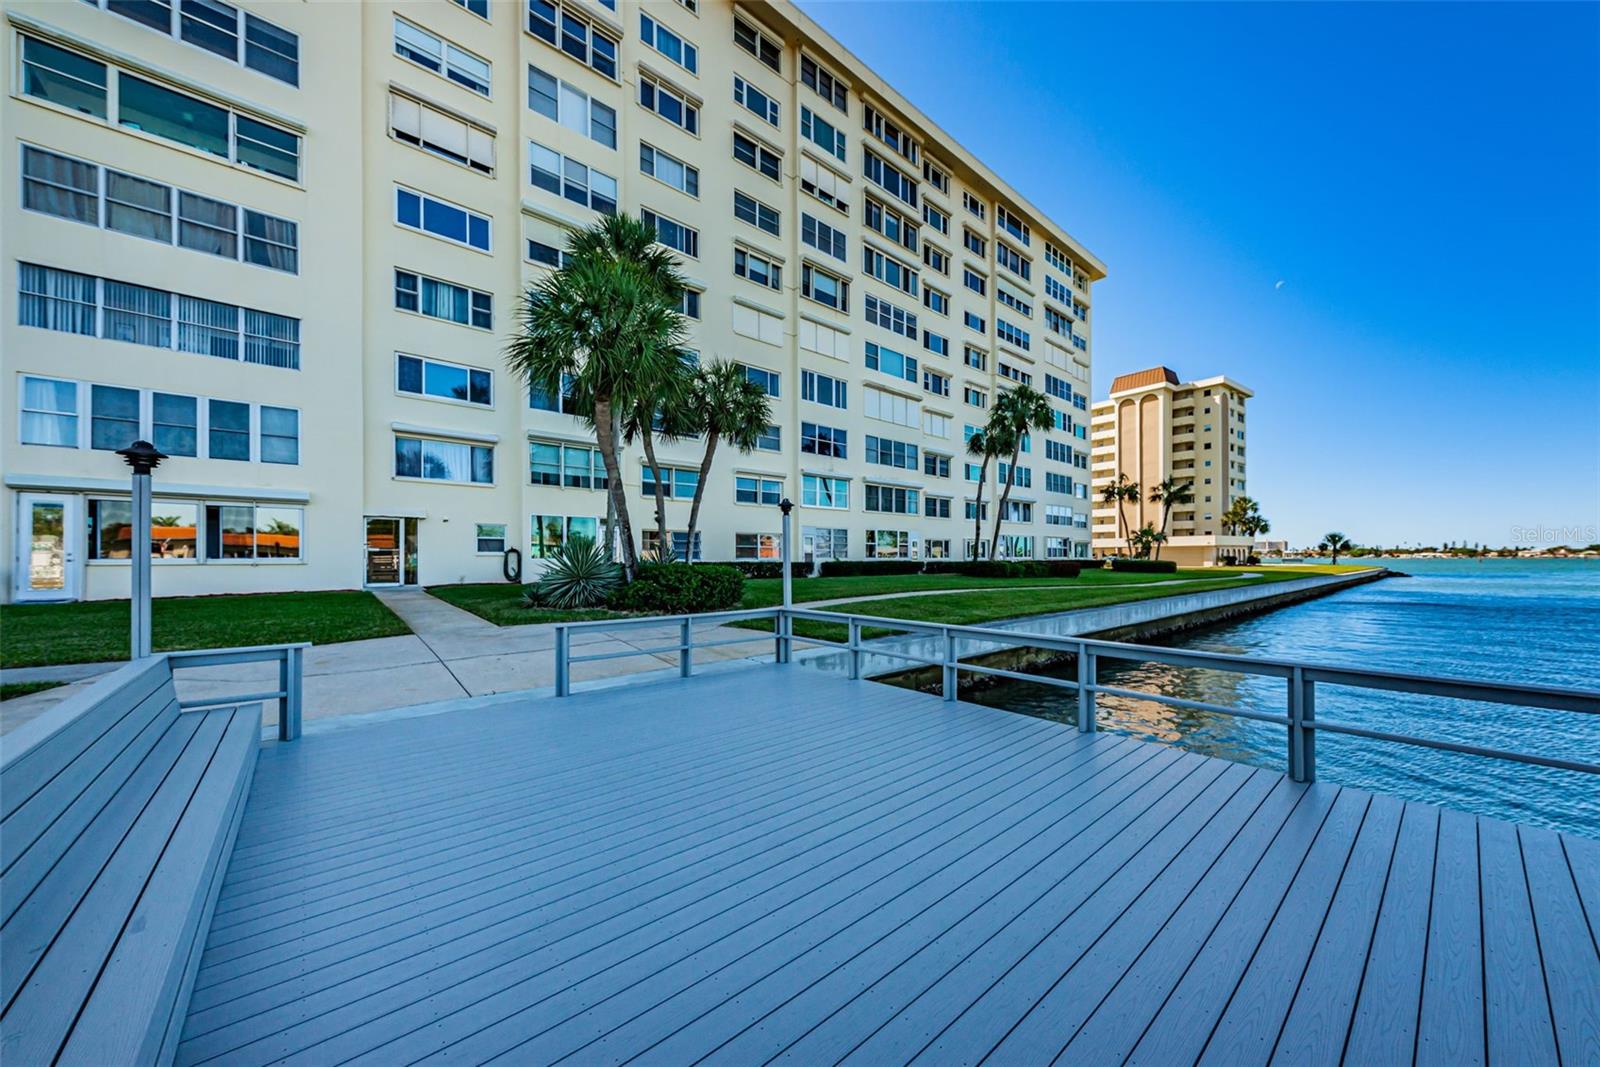 Dock steps away from your condo